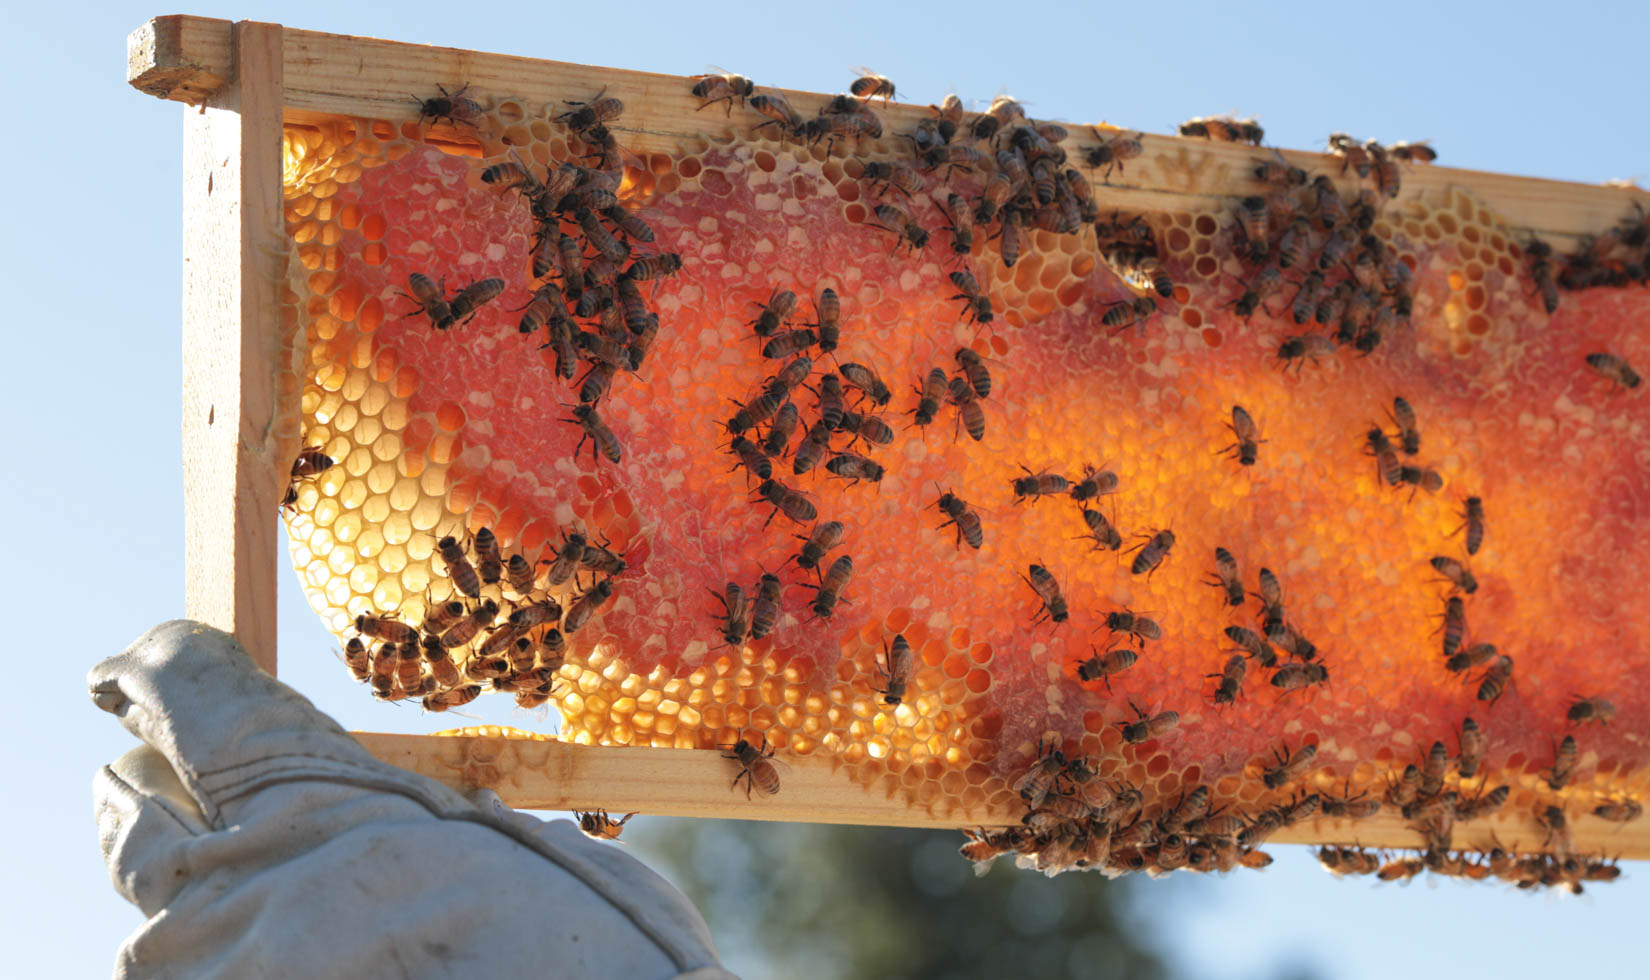 Honey bees with honeycomb